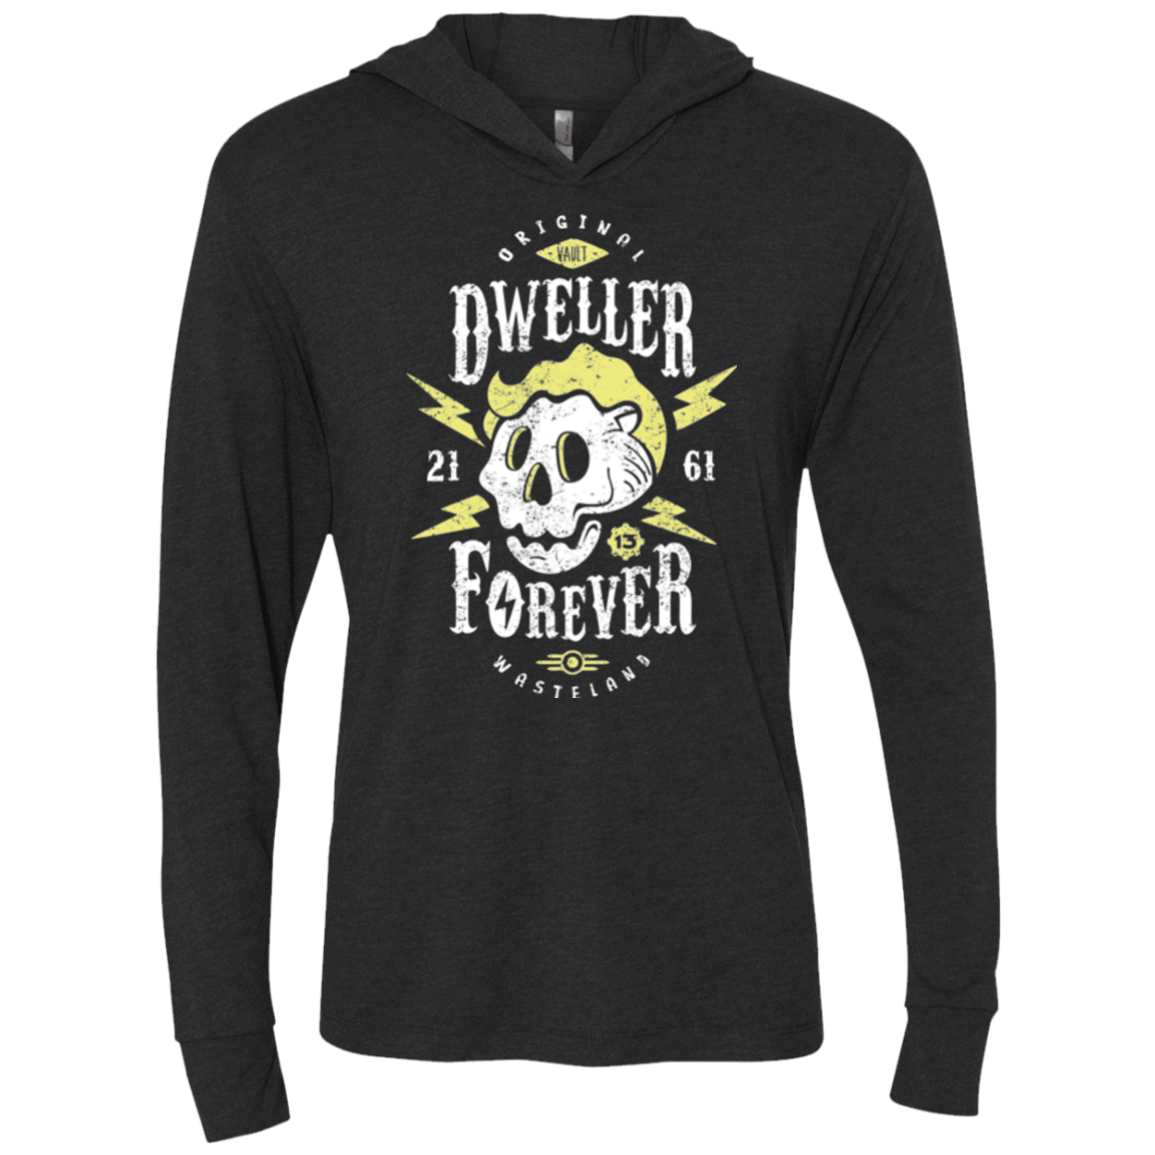 T-Shirts Vintage Black / X-Small Dweller Forever Triblend Long Sleeve Hoodie Tee